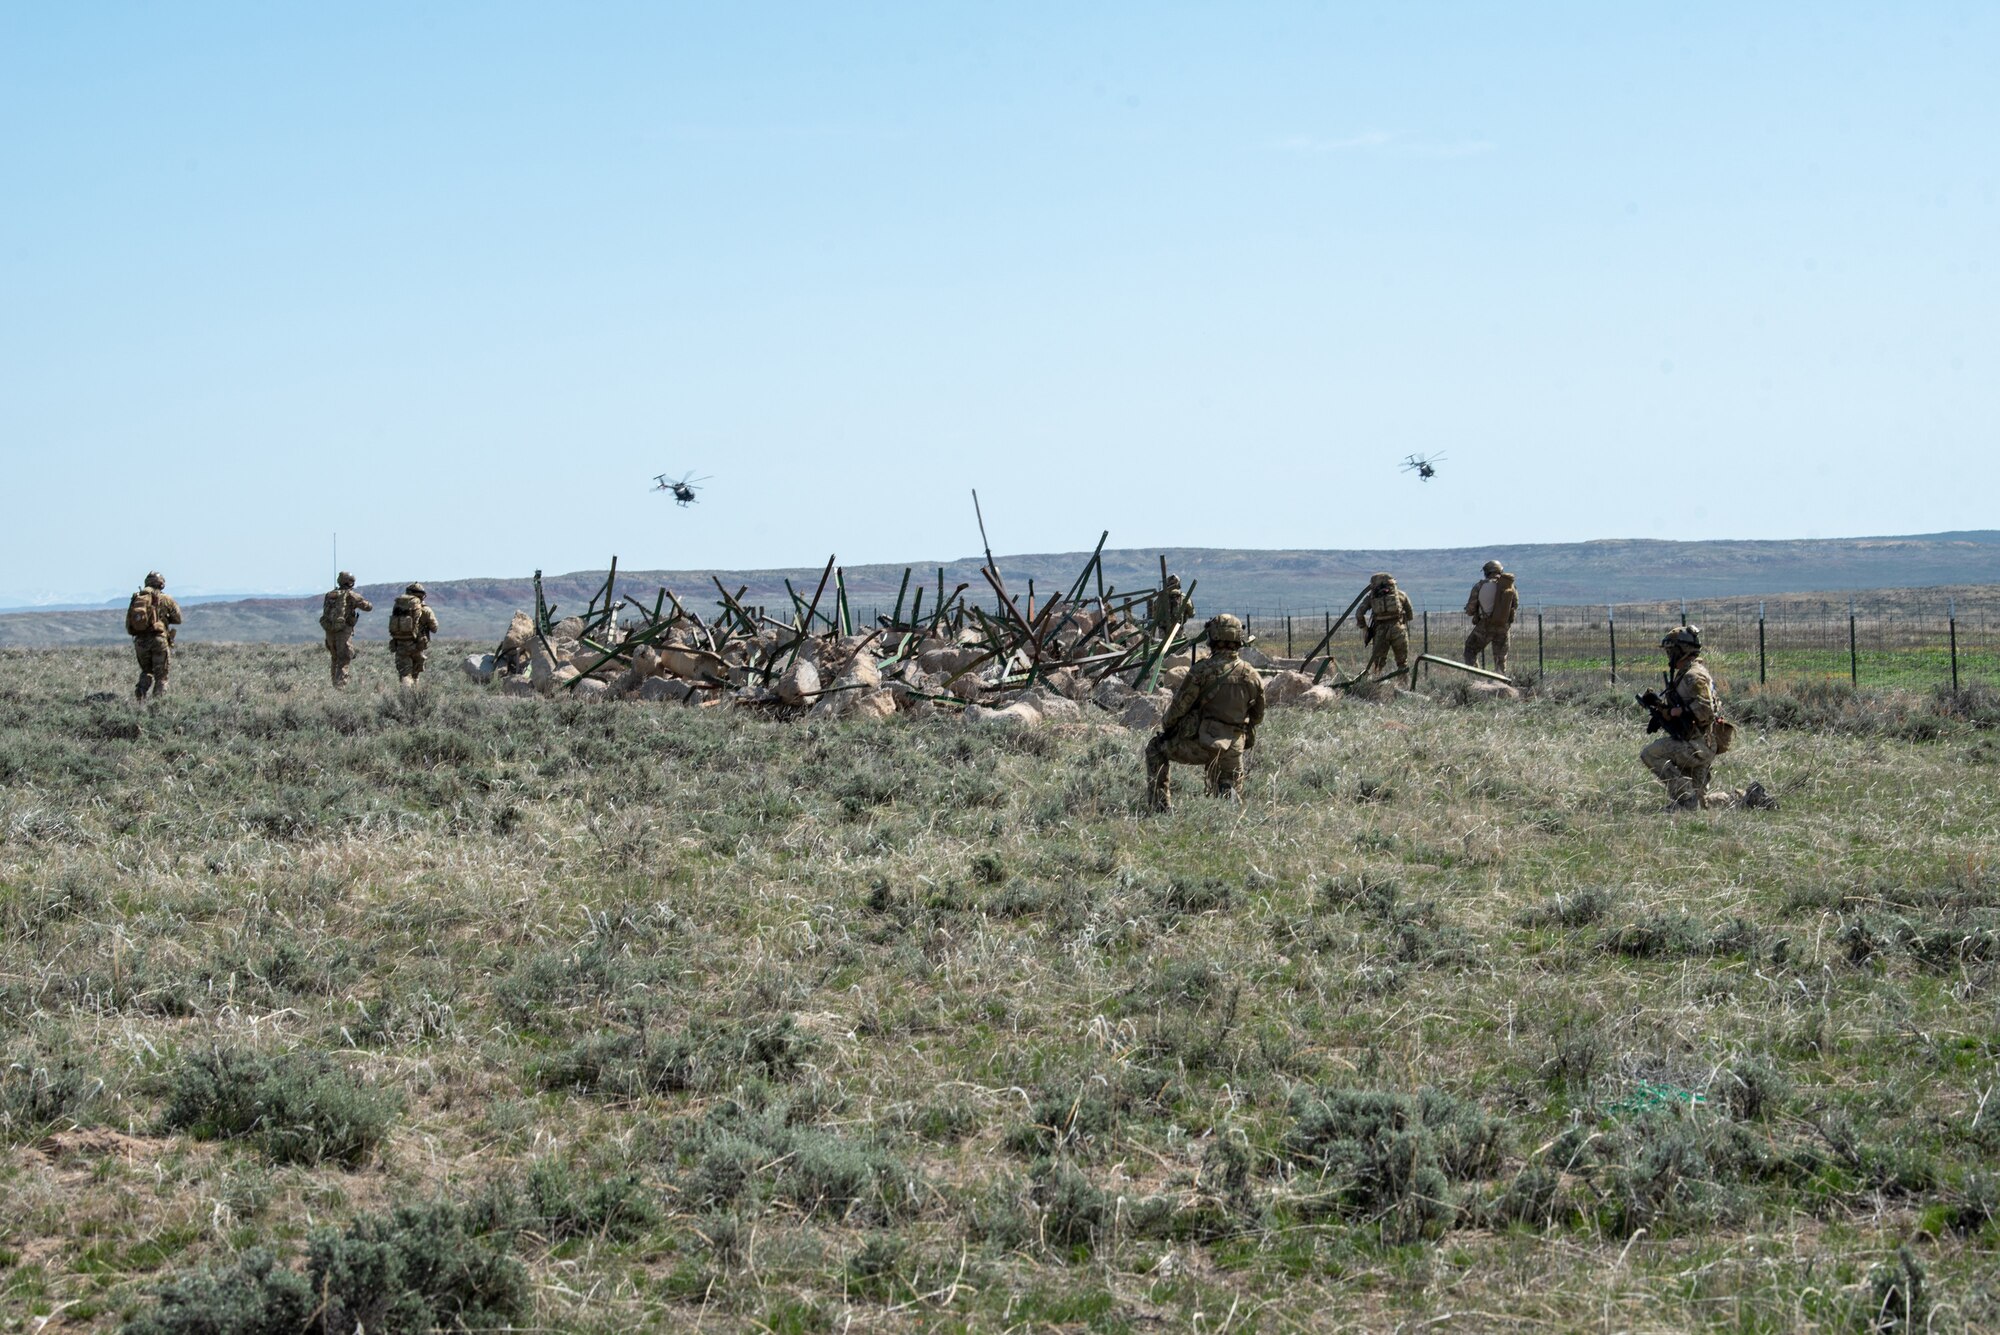 Airmen with the Kentucky Air National Guard’s 123rd Special Tactics Squadron perform combat search-and-rescue during Exercise Agile Chariot near Riverton, Wyoming, May 2, 2023. Agile Chariot tested Agile Combat Employment capabilities, including using smaller, more dispersed locations and teams to rapidly move and support aircraft, pilots and other personnel wherever they’re needed. (U.S. Air National Guard photo by Master Sgt. Phil Speck)